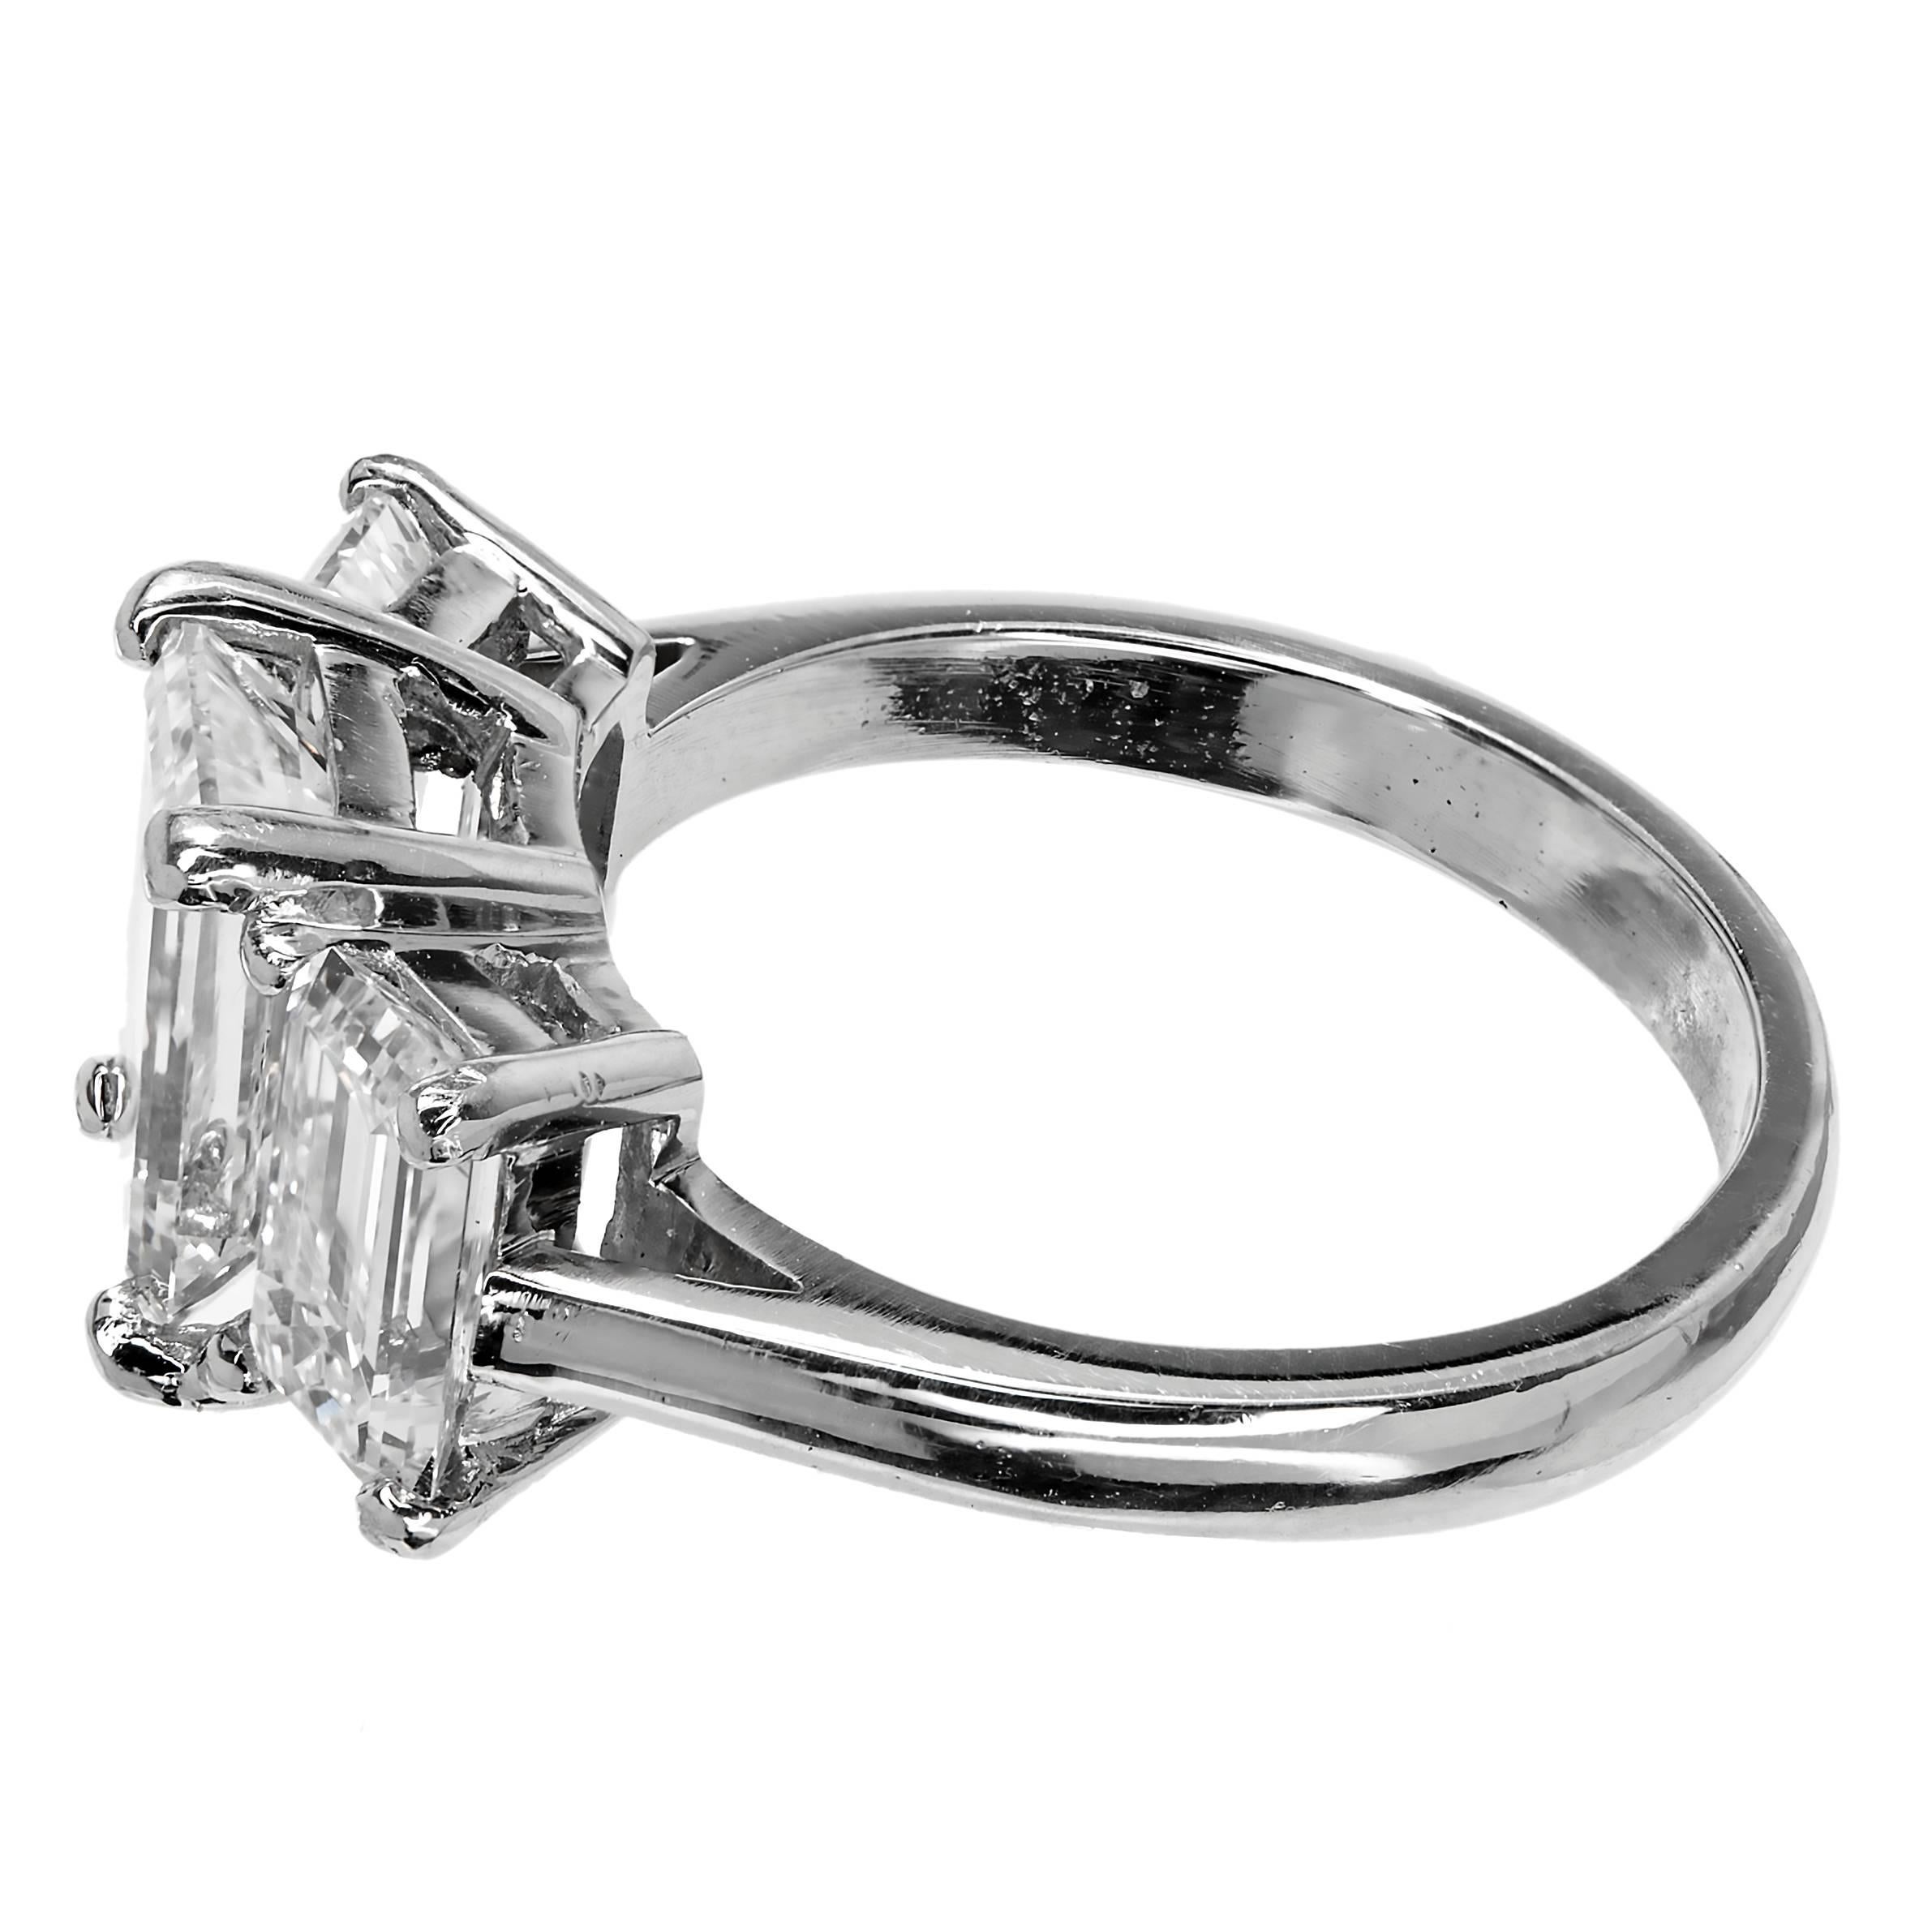 Emerald cut 3 stone well matched diamond ring. All GIA certified. All D to E color. All VS1. Handmade solid Platinum setting. The ring is brand new and handmade from the Peter Suchy Workshop PSD.

1 Emerald cut diamond, approx. total weight